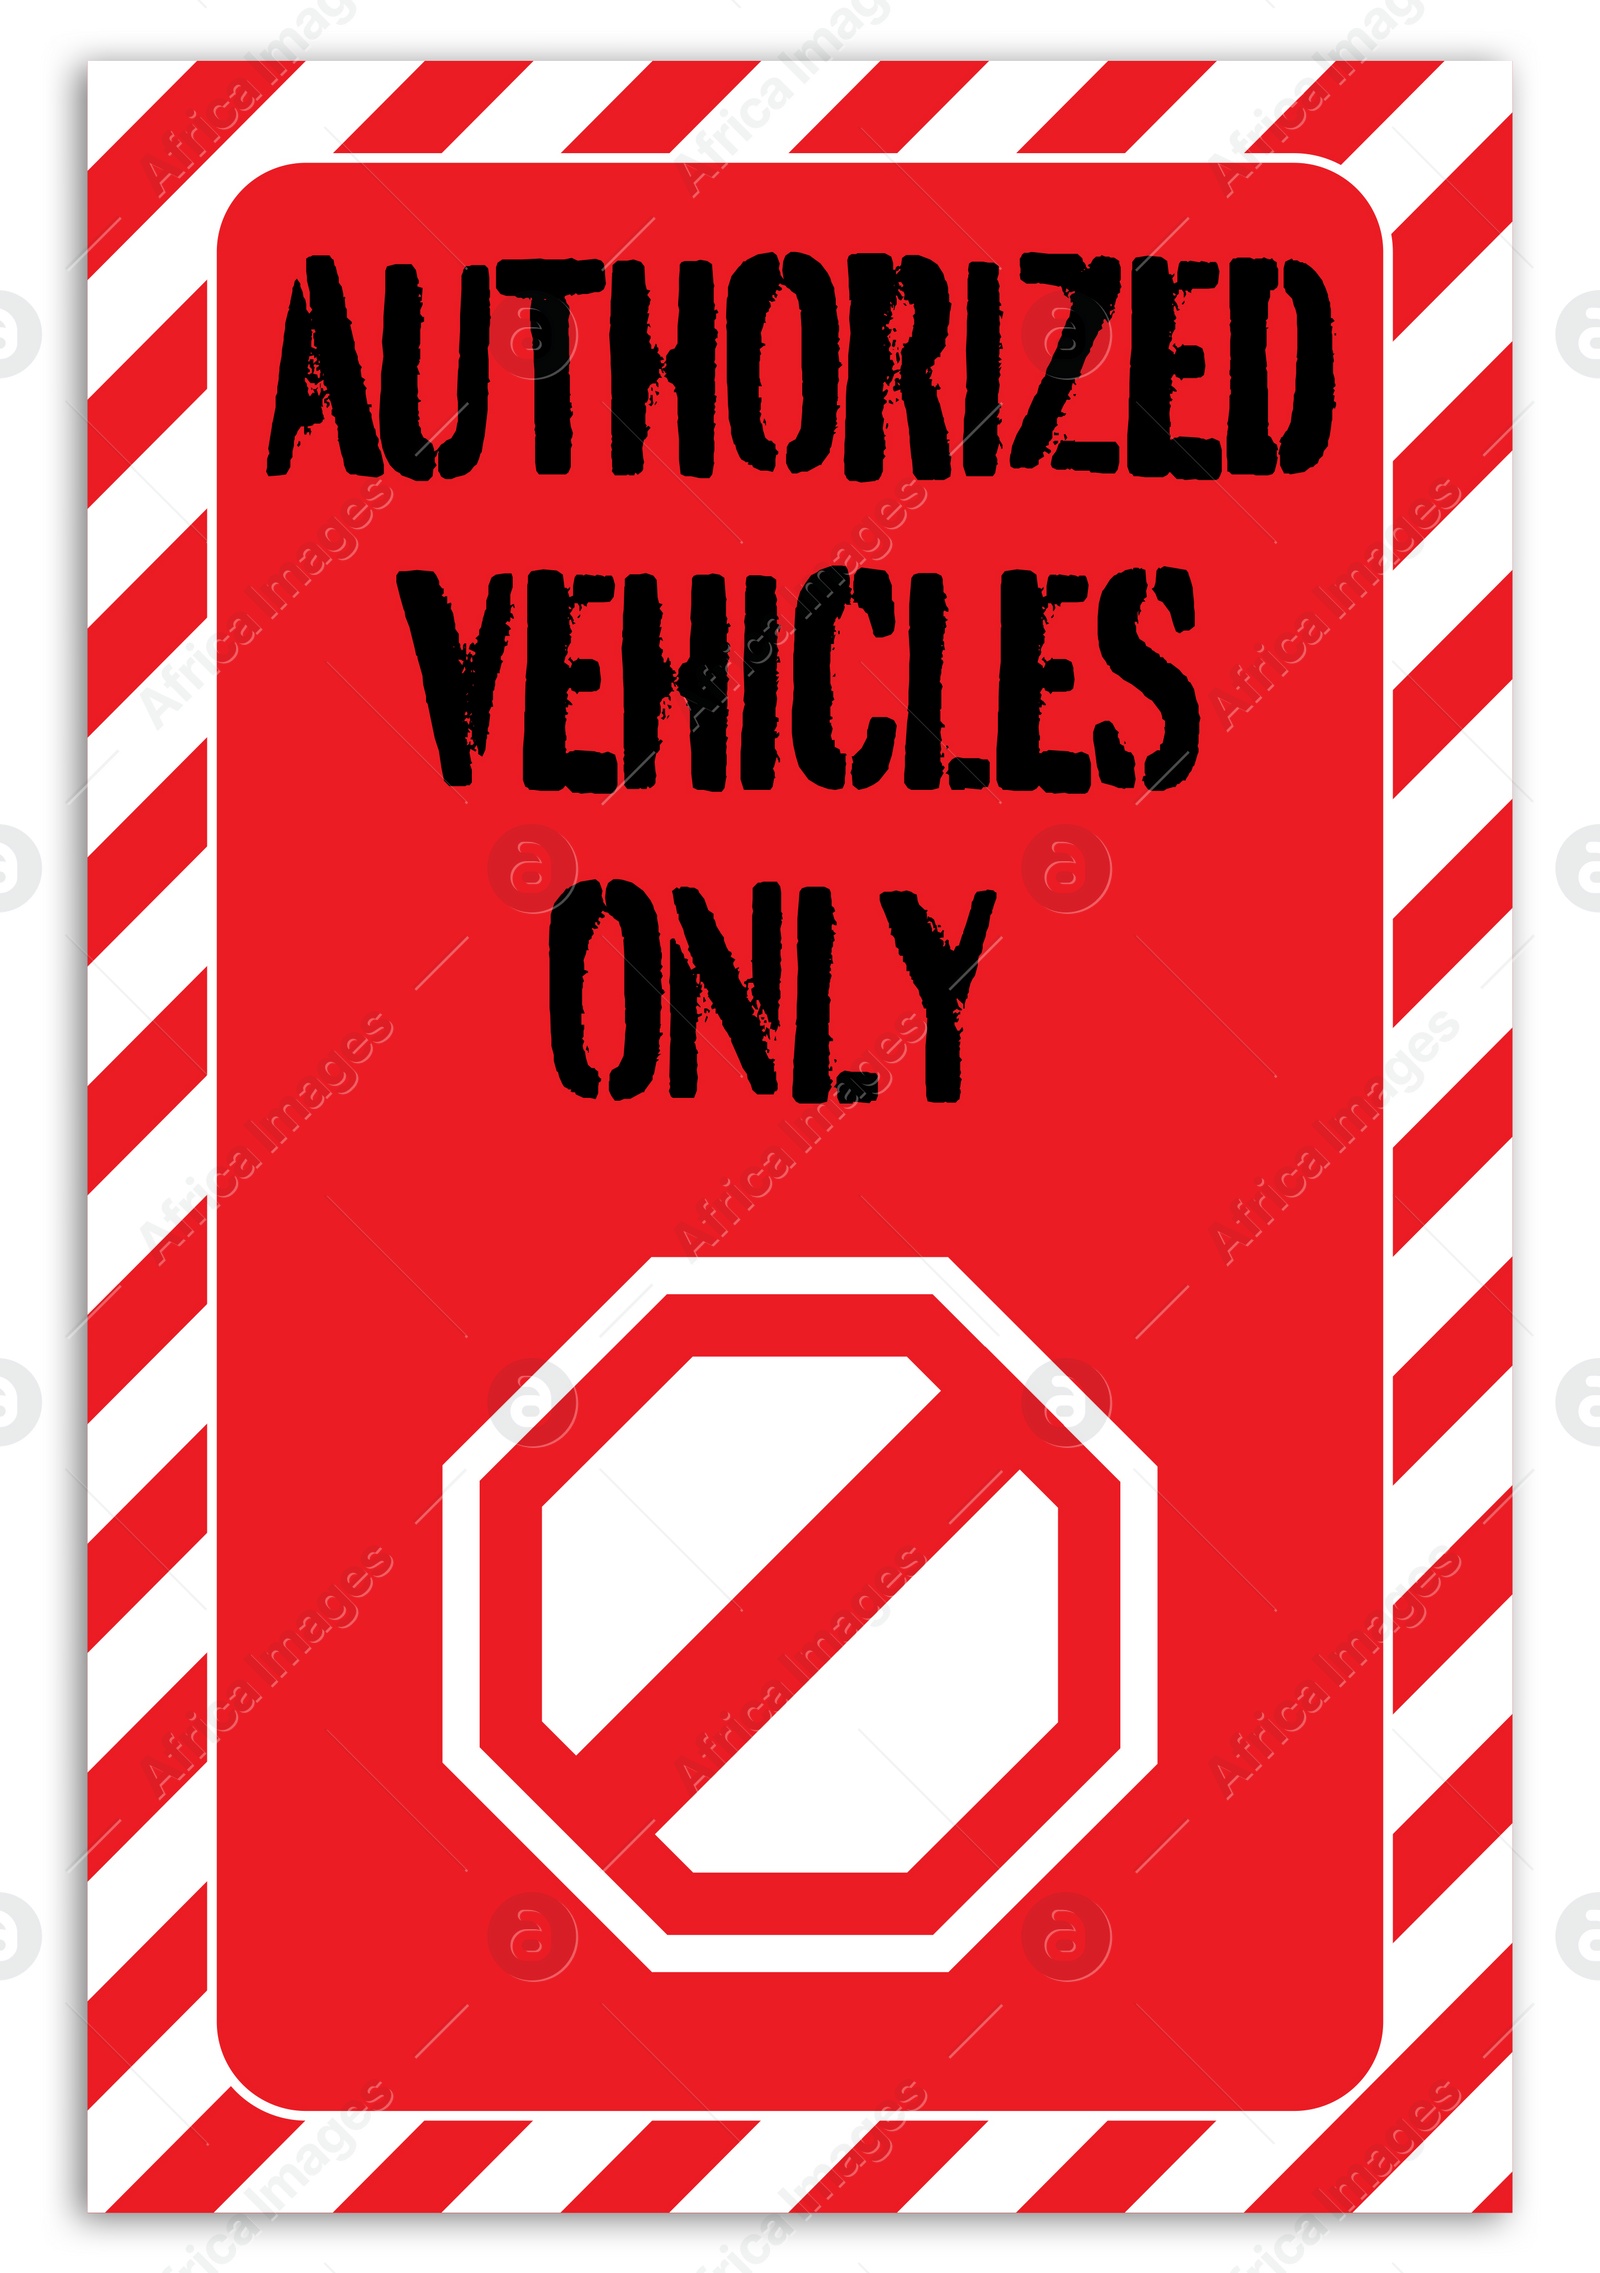 Image of Sign with text Authorized Vehicles Only on white background